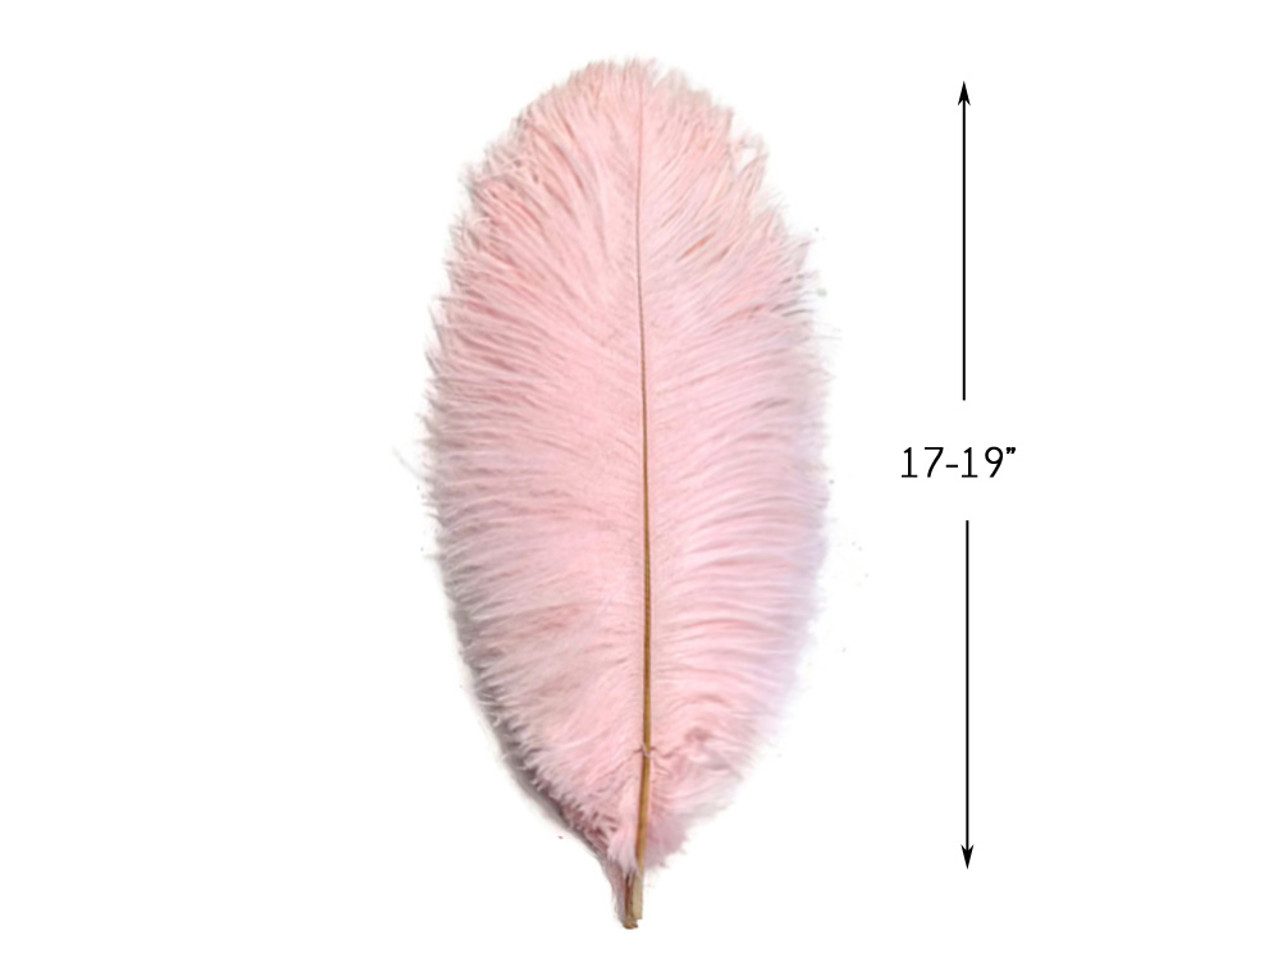 Ostrich Flexible Feathers 9-12 (Baby Pink) for Sale Online